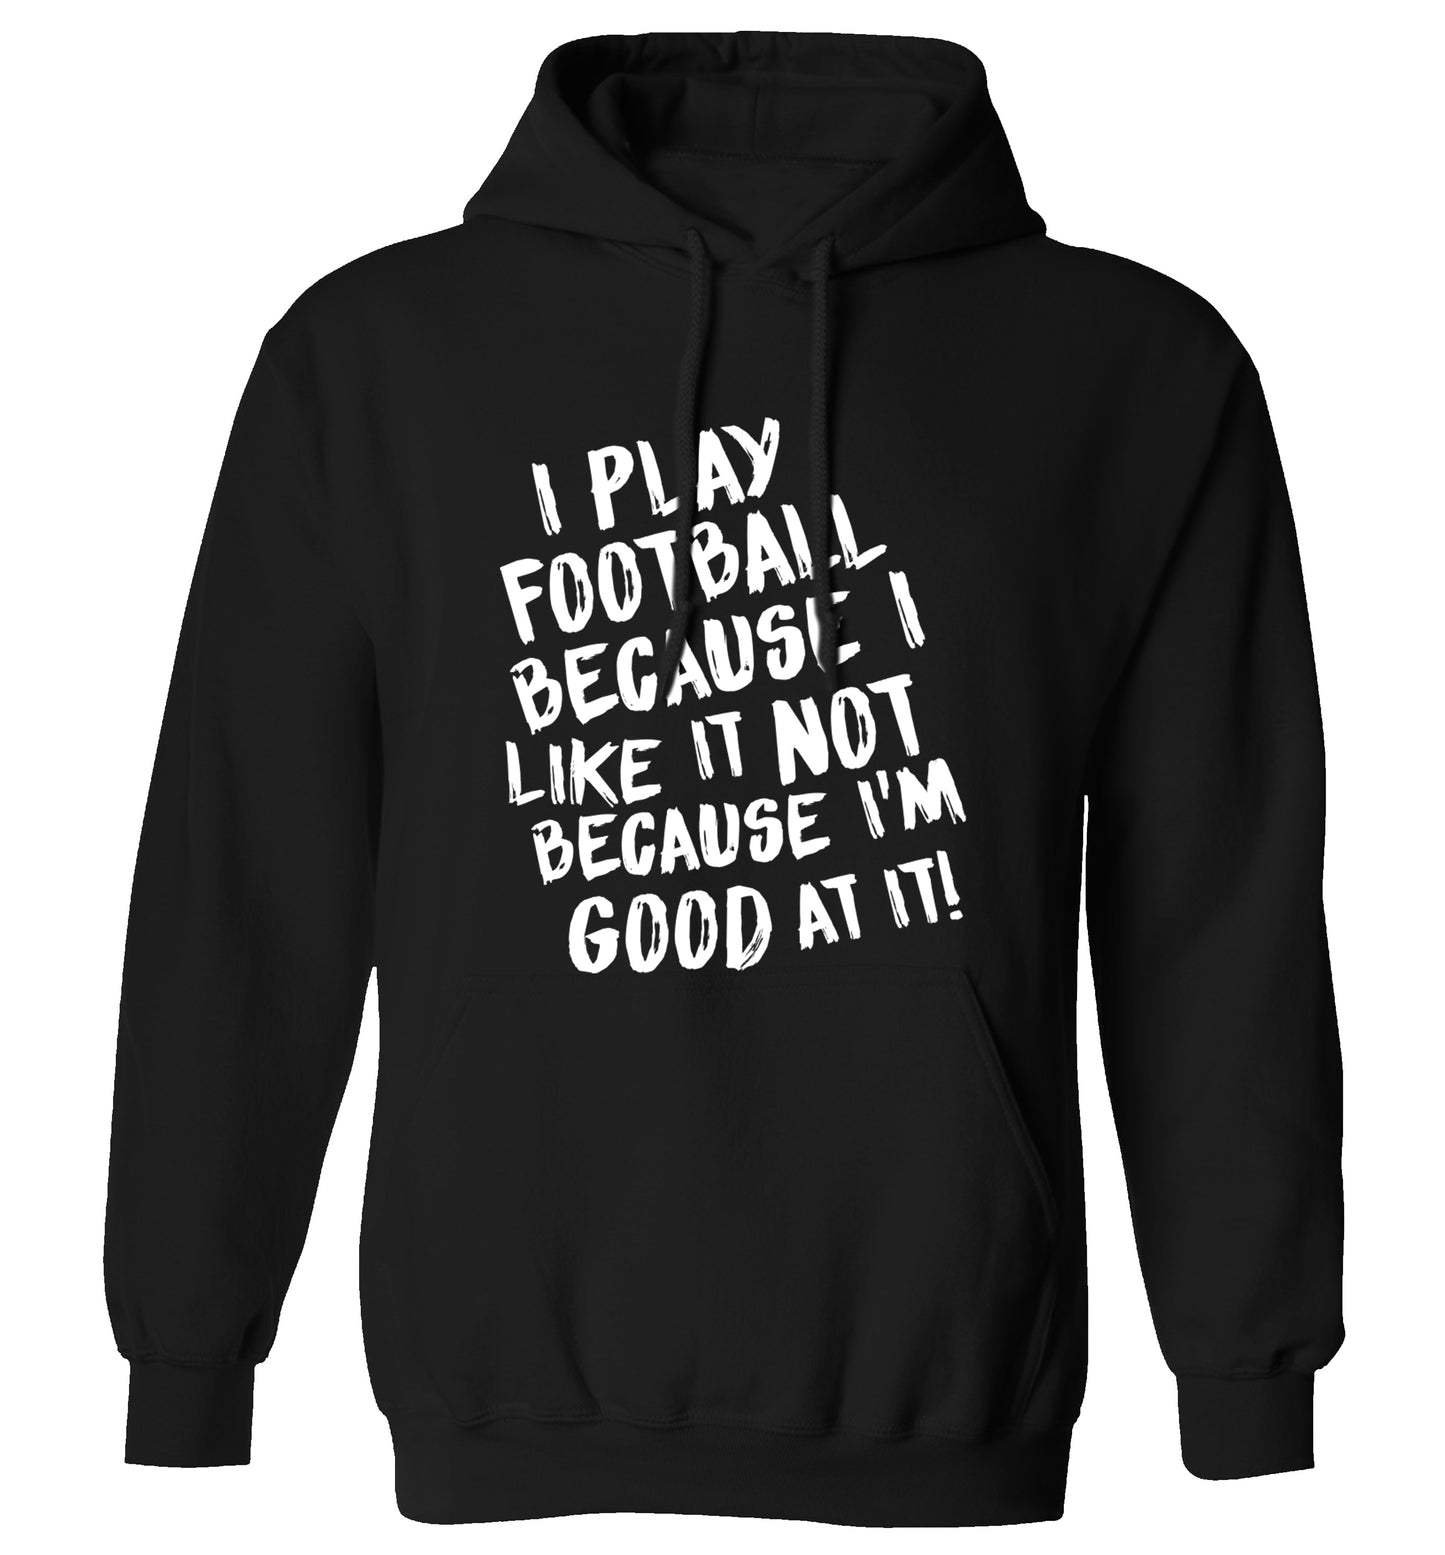 I play football because I like it not because I'm good at it adults unisexblack hoodie 2XL